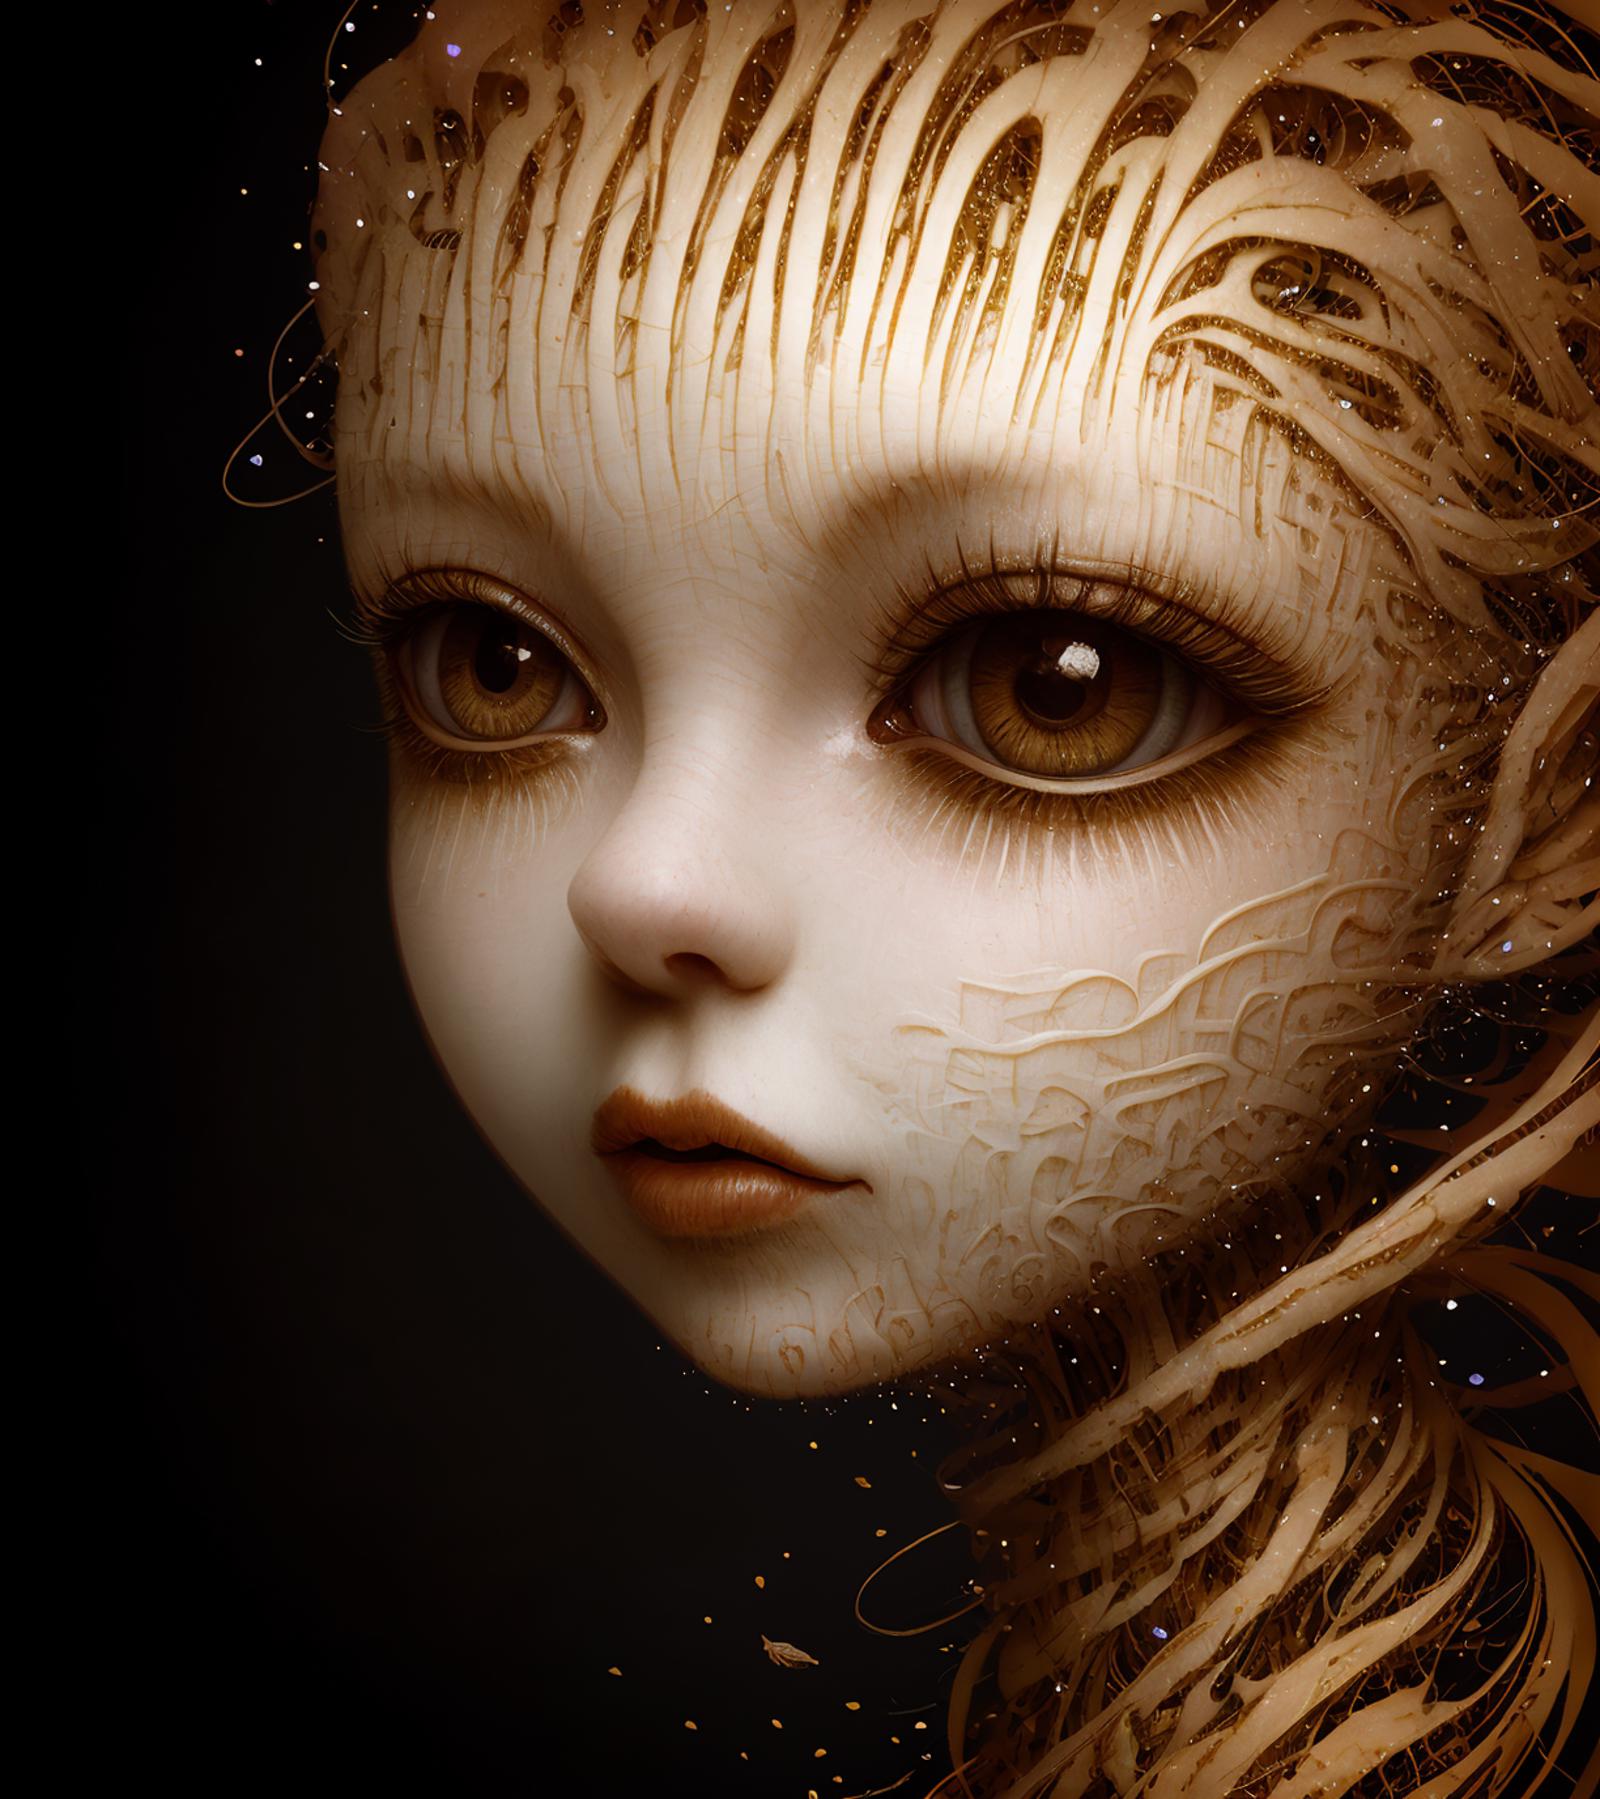 Surrealistic portraits in style of Naoto Hattori image by AIdollagency